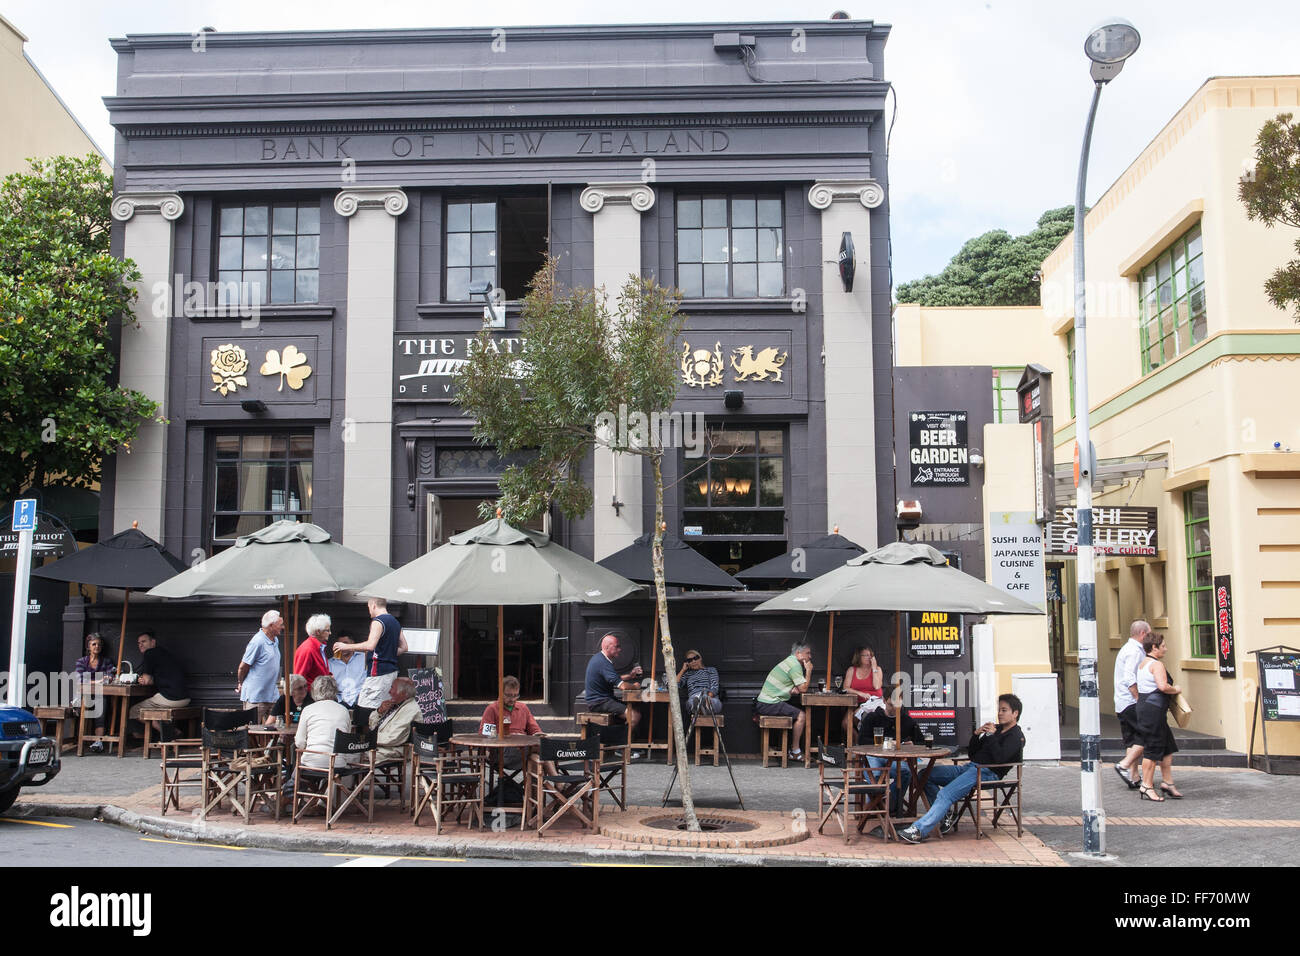 Sitting outside at bar,cafe pub in old Bank of New Zealand Building in Devonport,Auckland,North Island,New Zealand,Pacific, Stock Photo